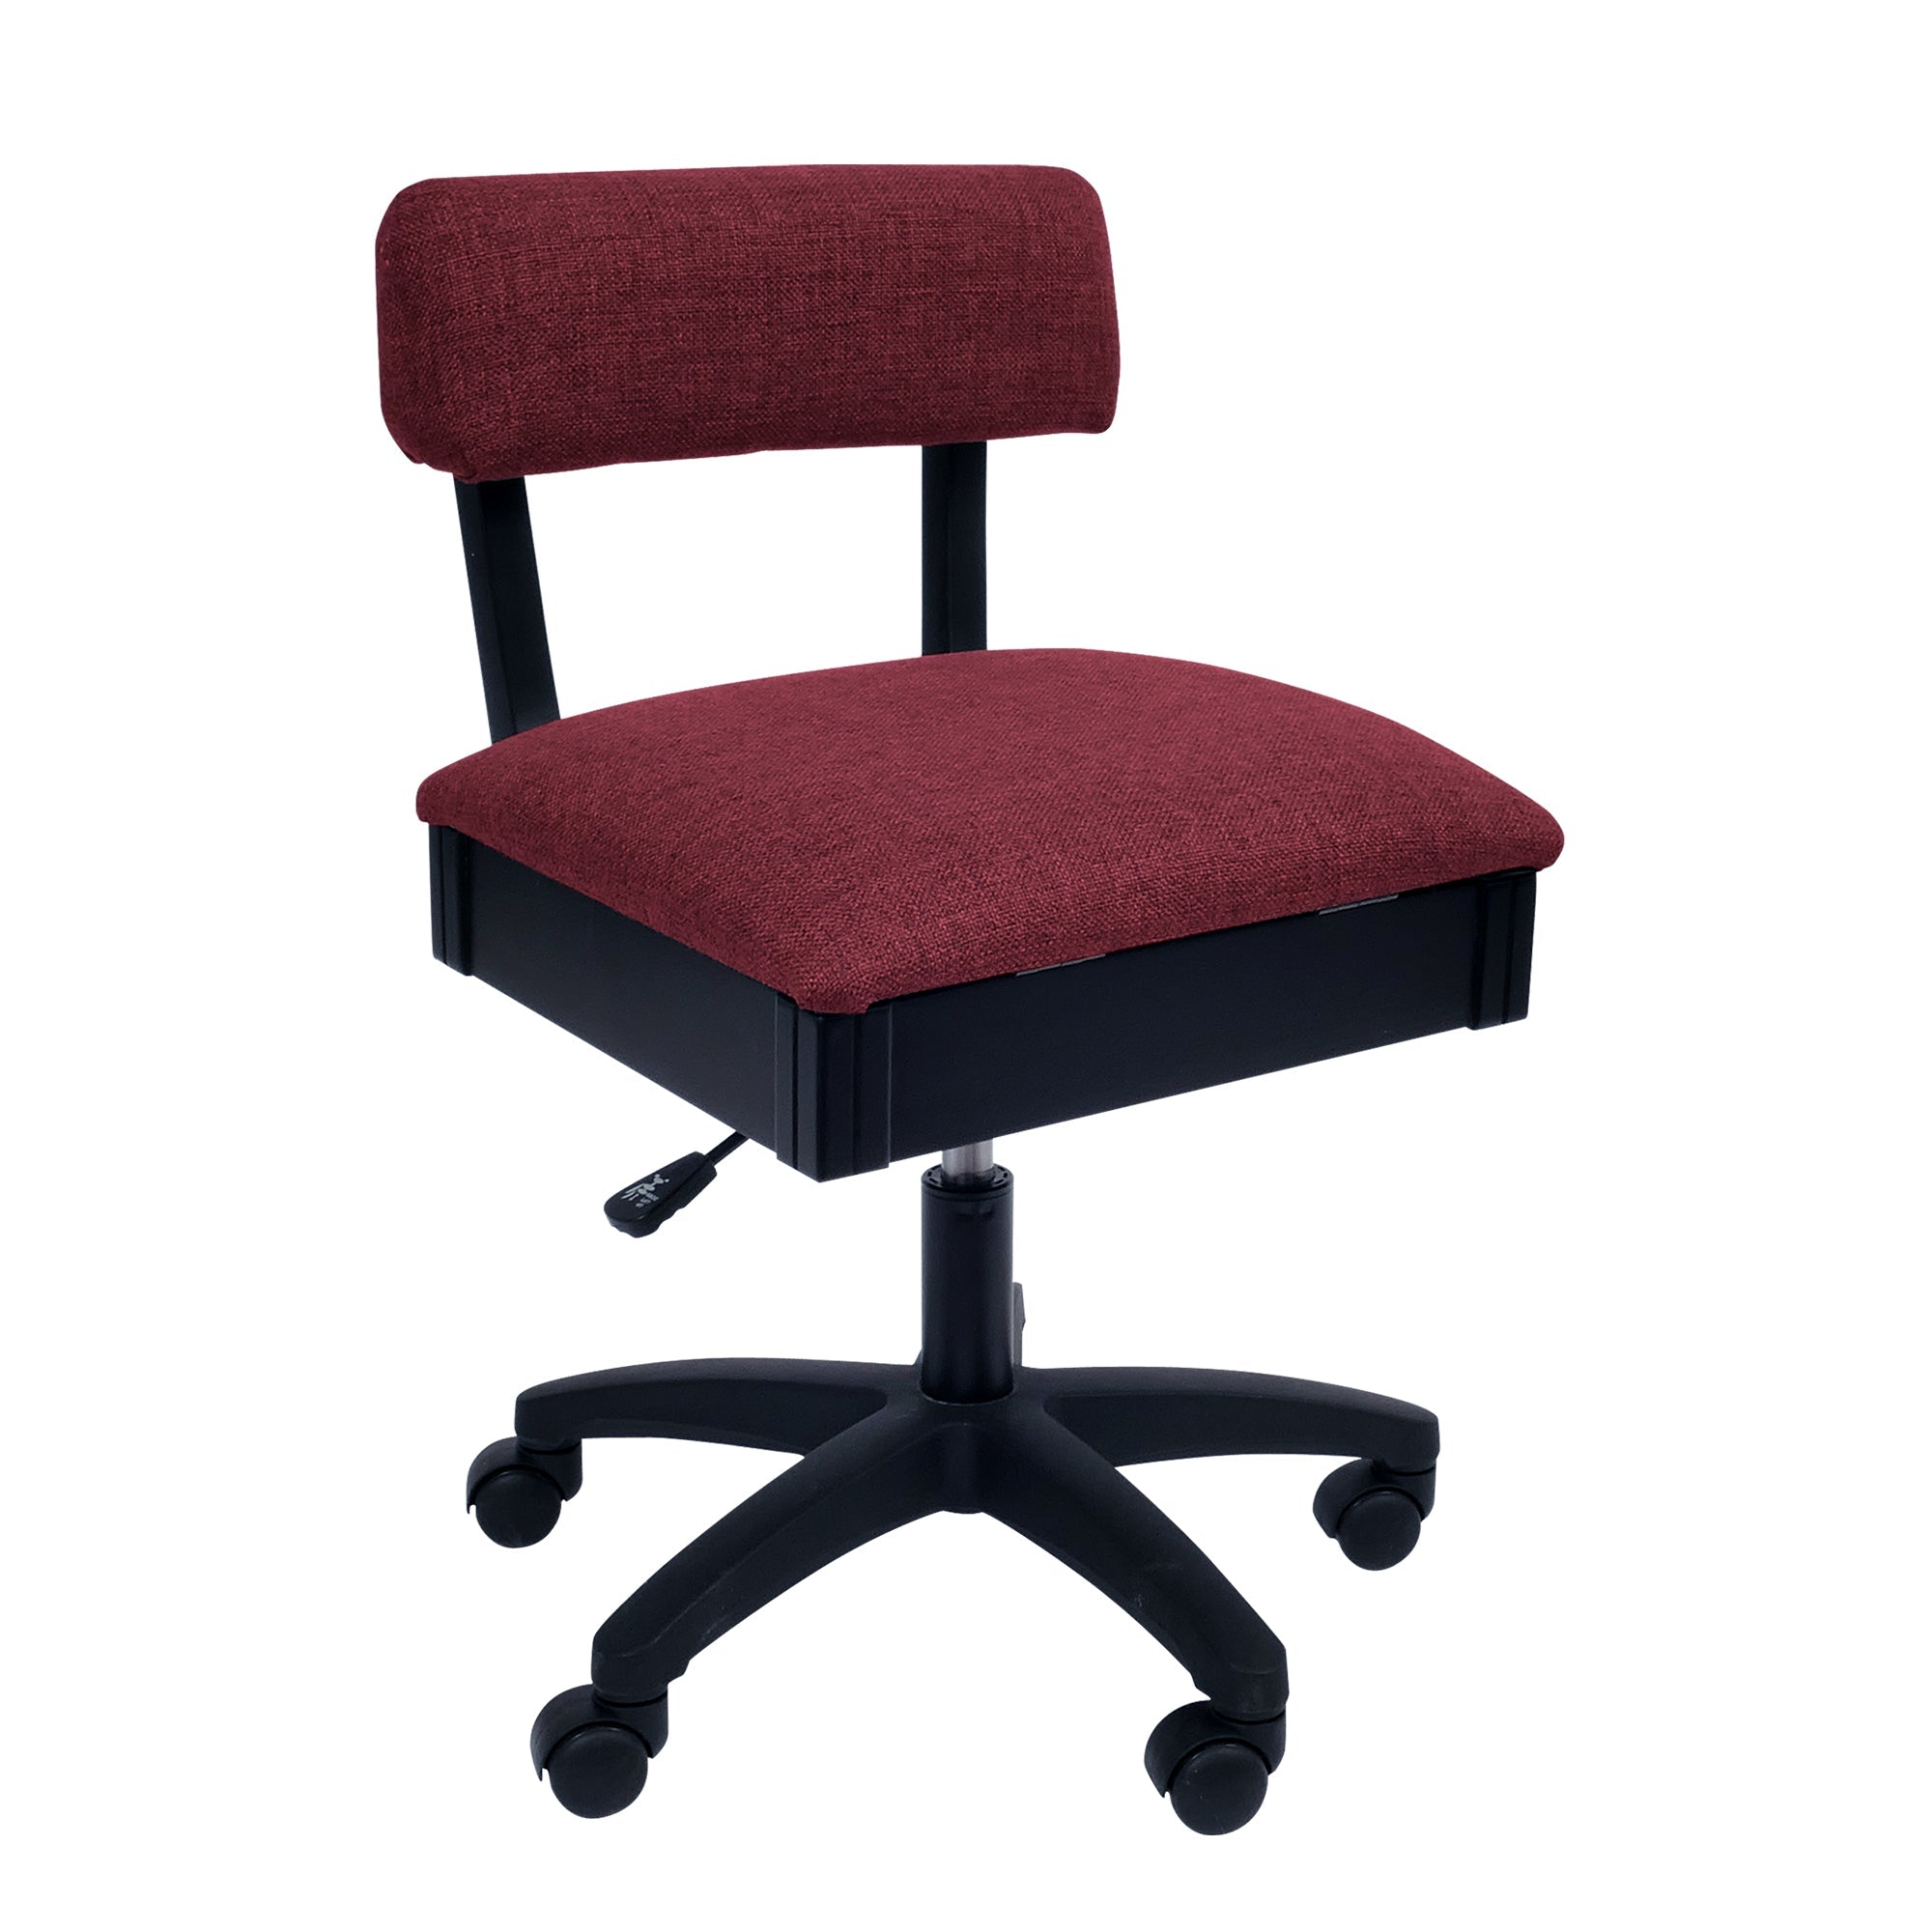 Arrow Height Adjustable Hydraulic Sewing Chair - Crown Ruby